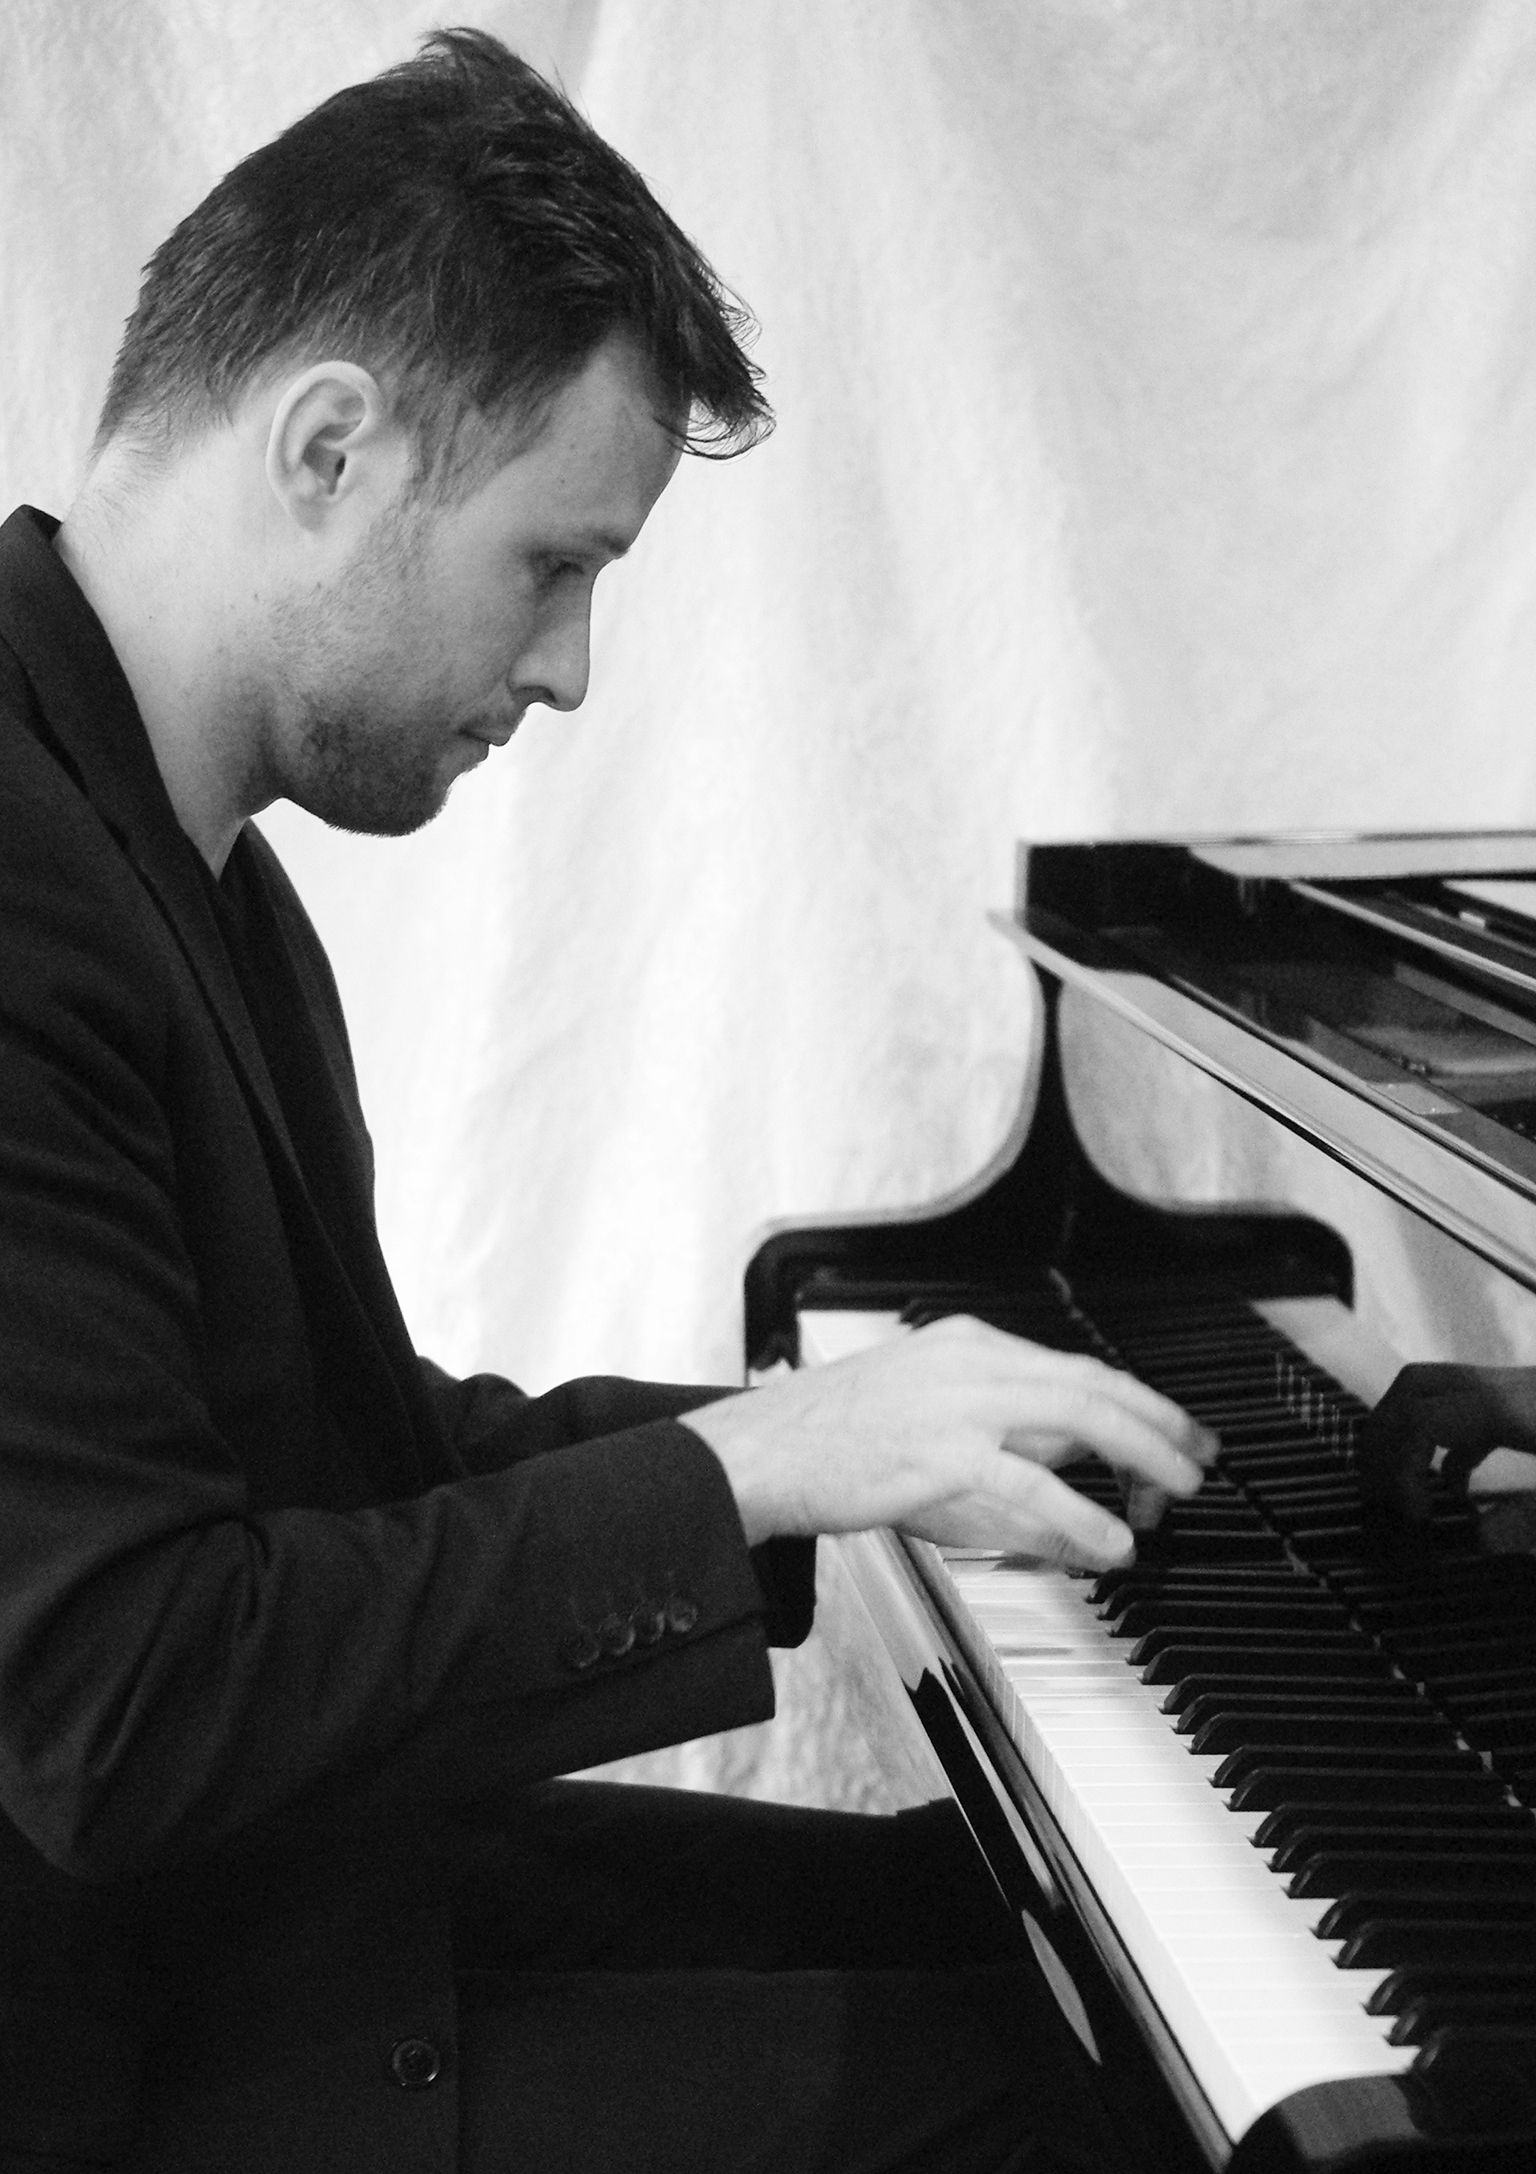 Stephen playing the piano